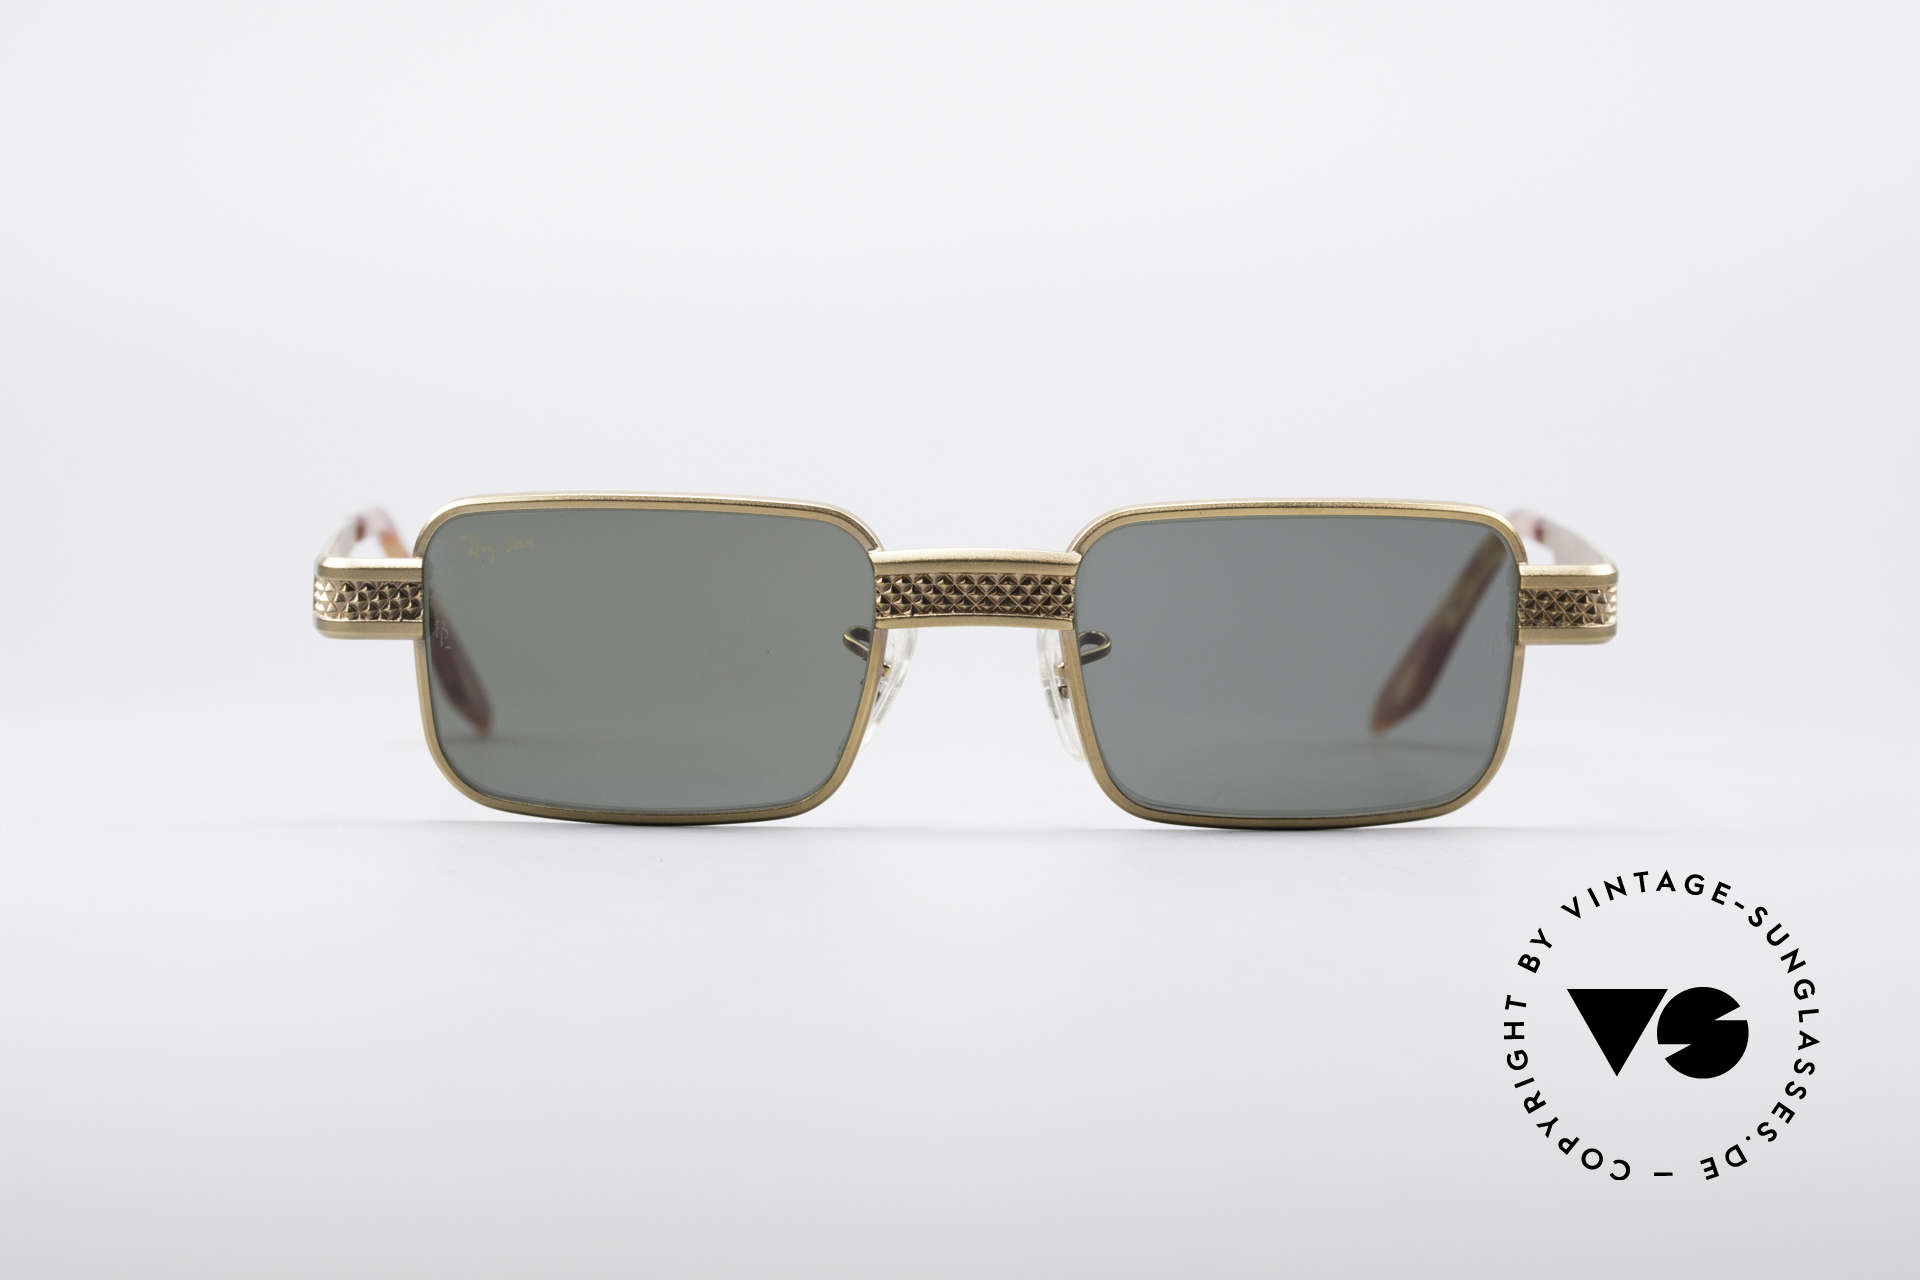 Sunglasses Ray Ban Undercurrent Metal Gold Rectangle